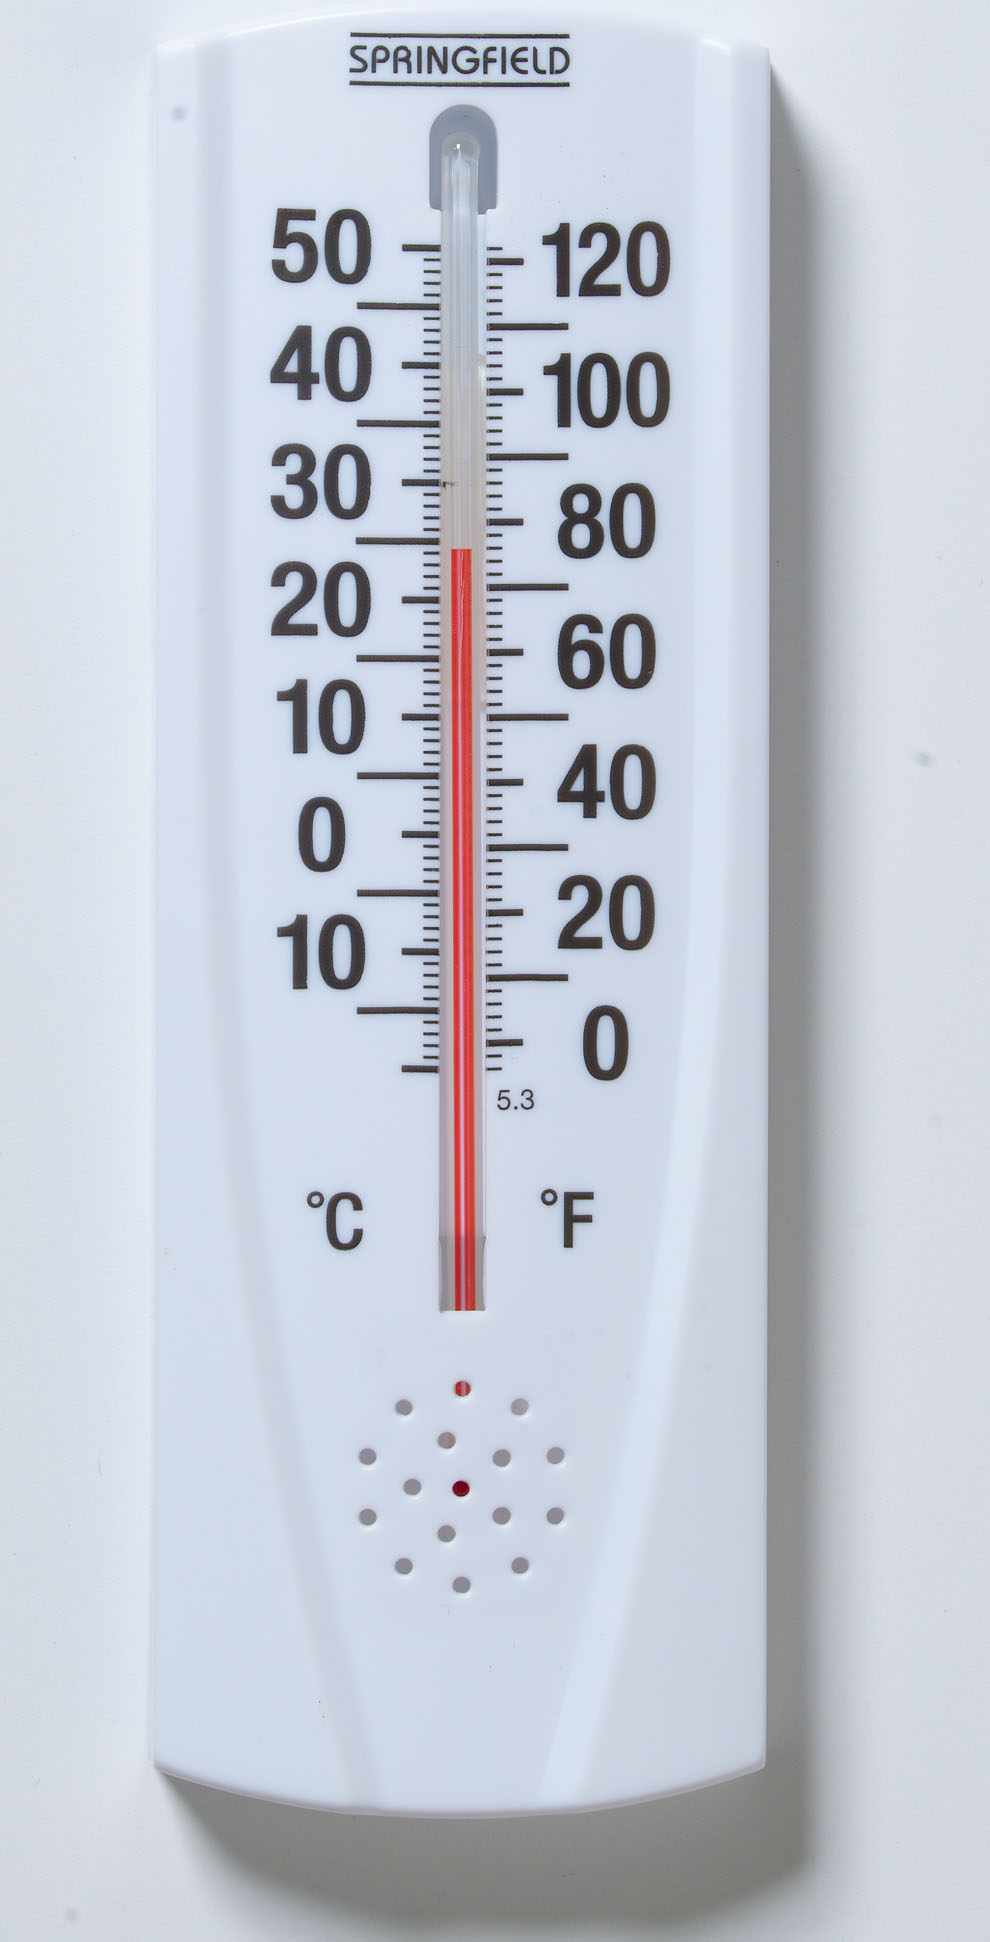 What is the most common unit used to measure temperature? Why is